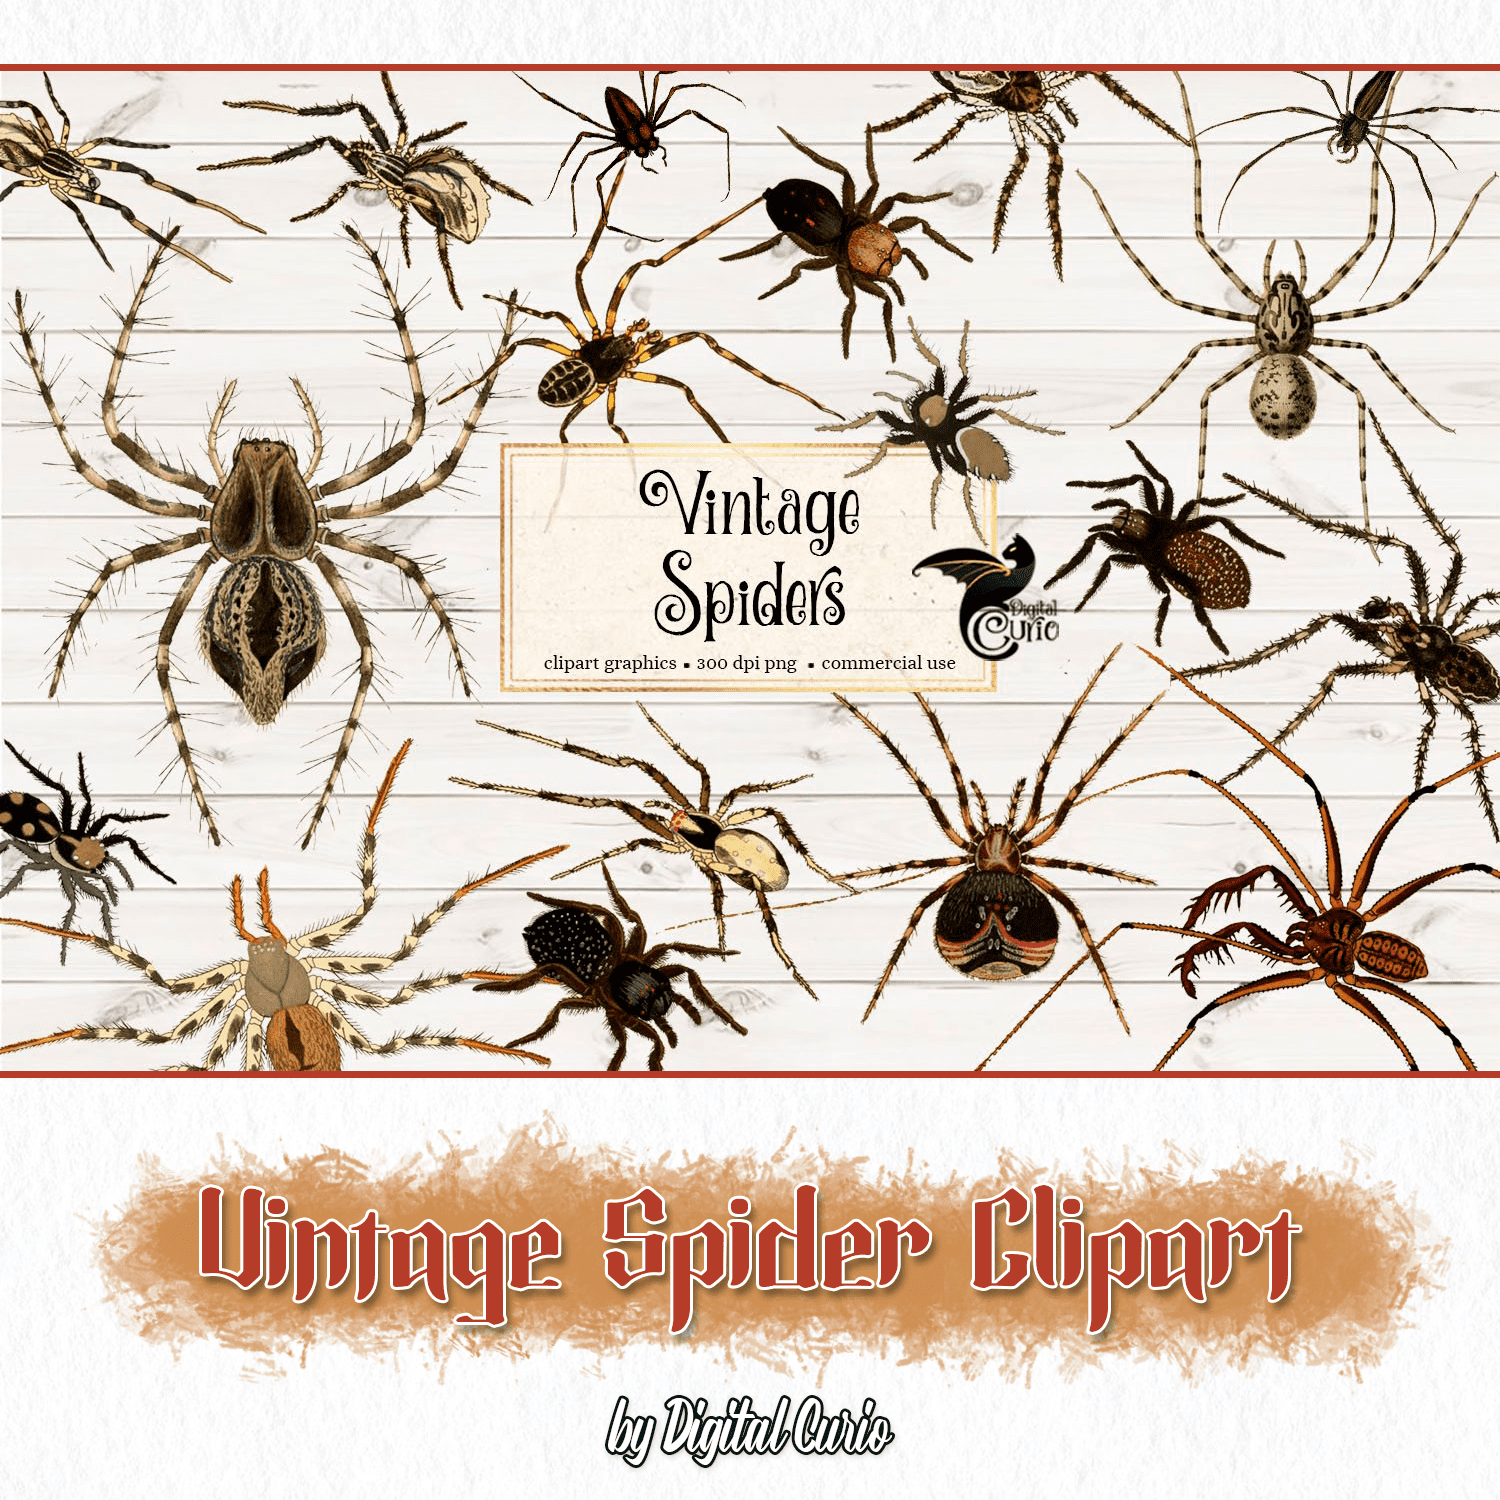 Vintage Spider Clipart cover.